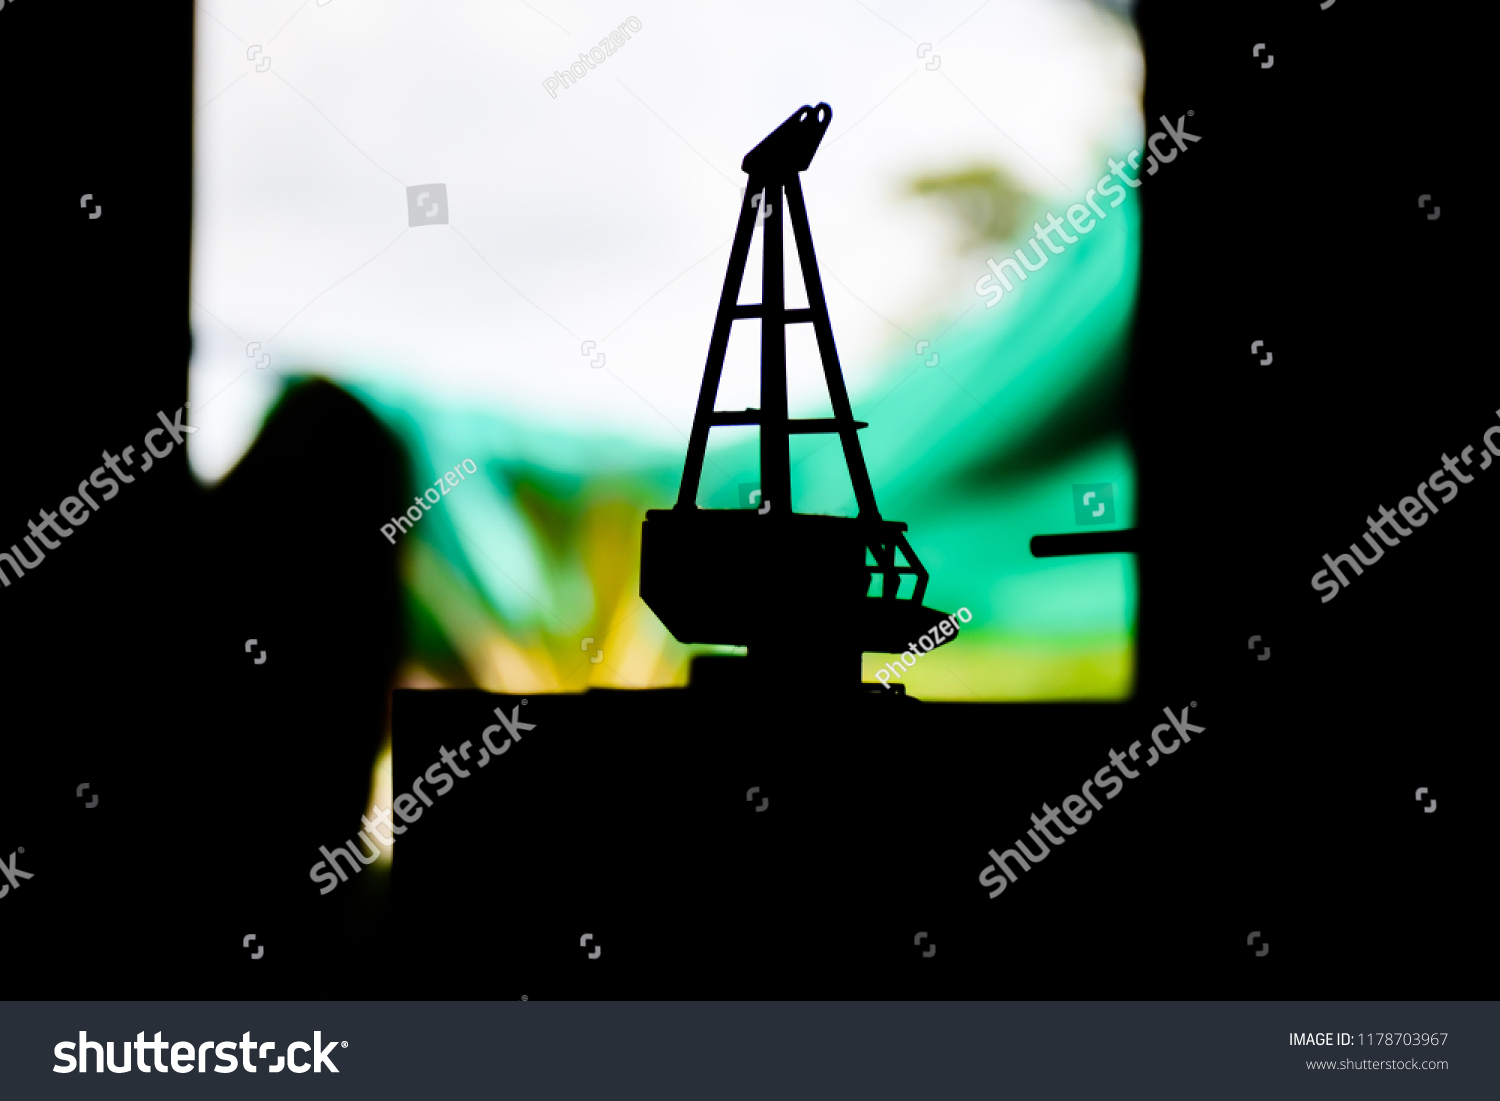 Silhouette of Platforms oil and gas model. #1178703967